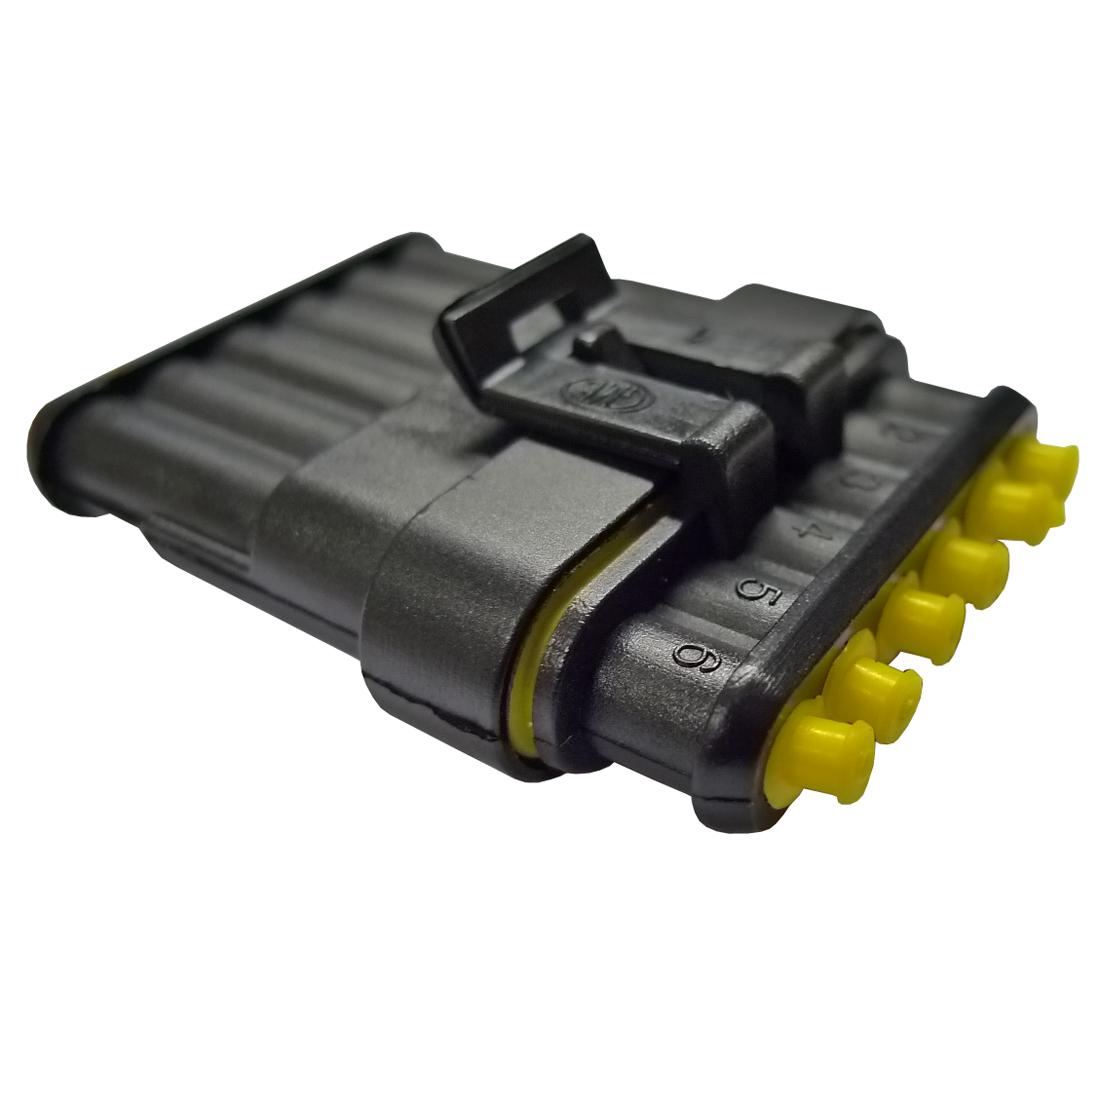 Six Pin Waterproof Electrical Connector from Merlin Motorsport  waterproof electrical connectors